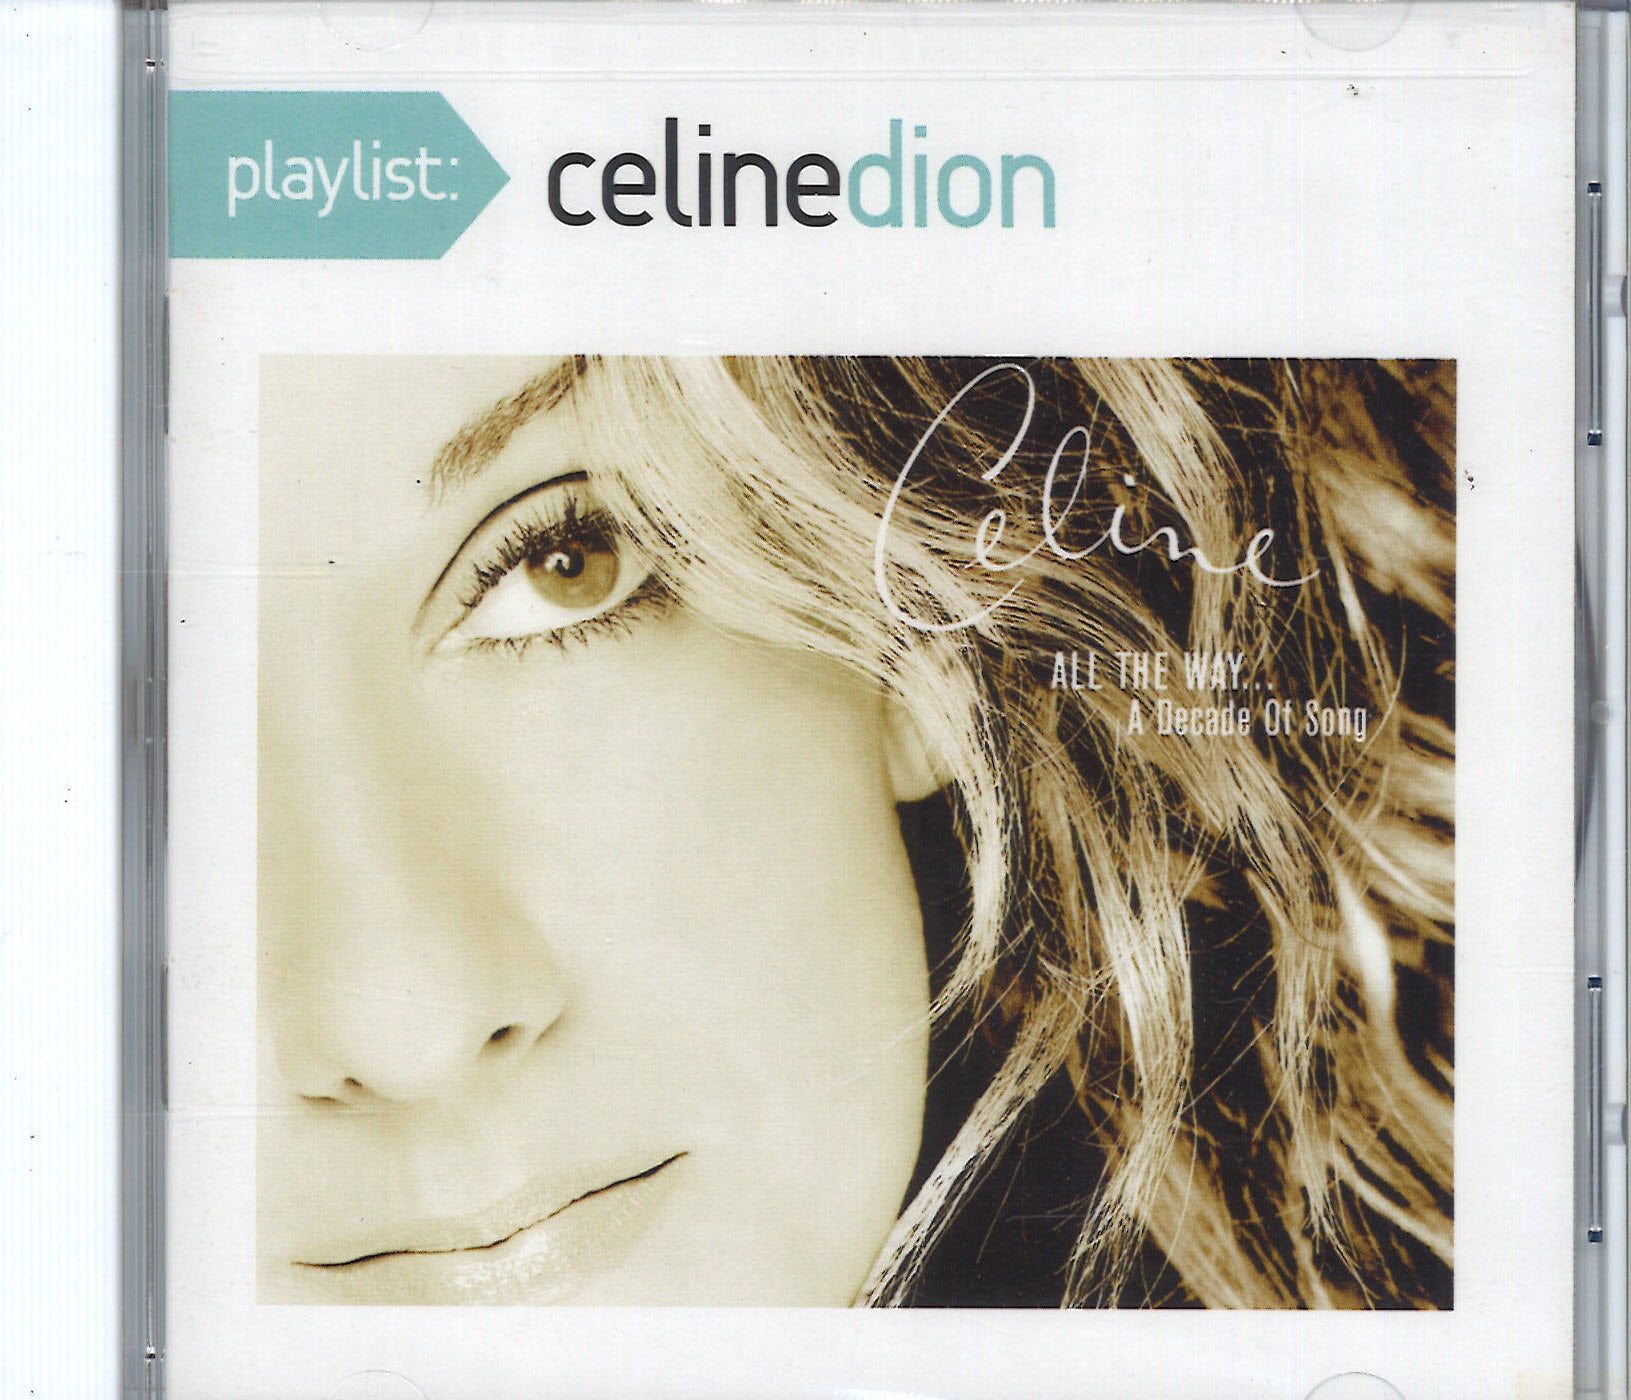 Playlist: Celine Dion All the Way... A Decade Of Song